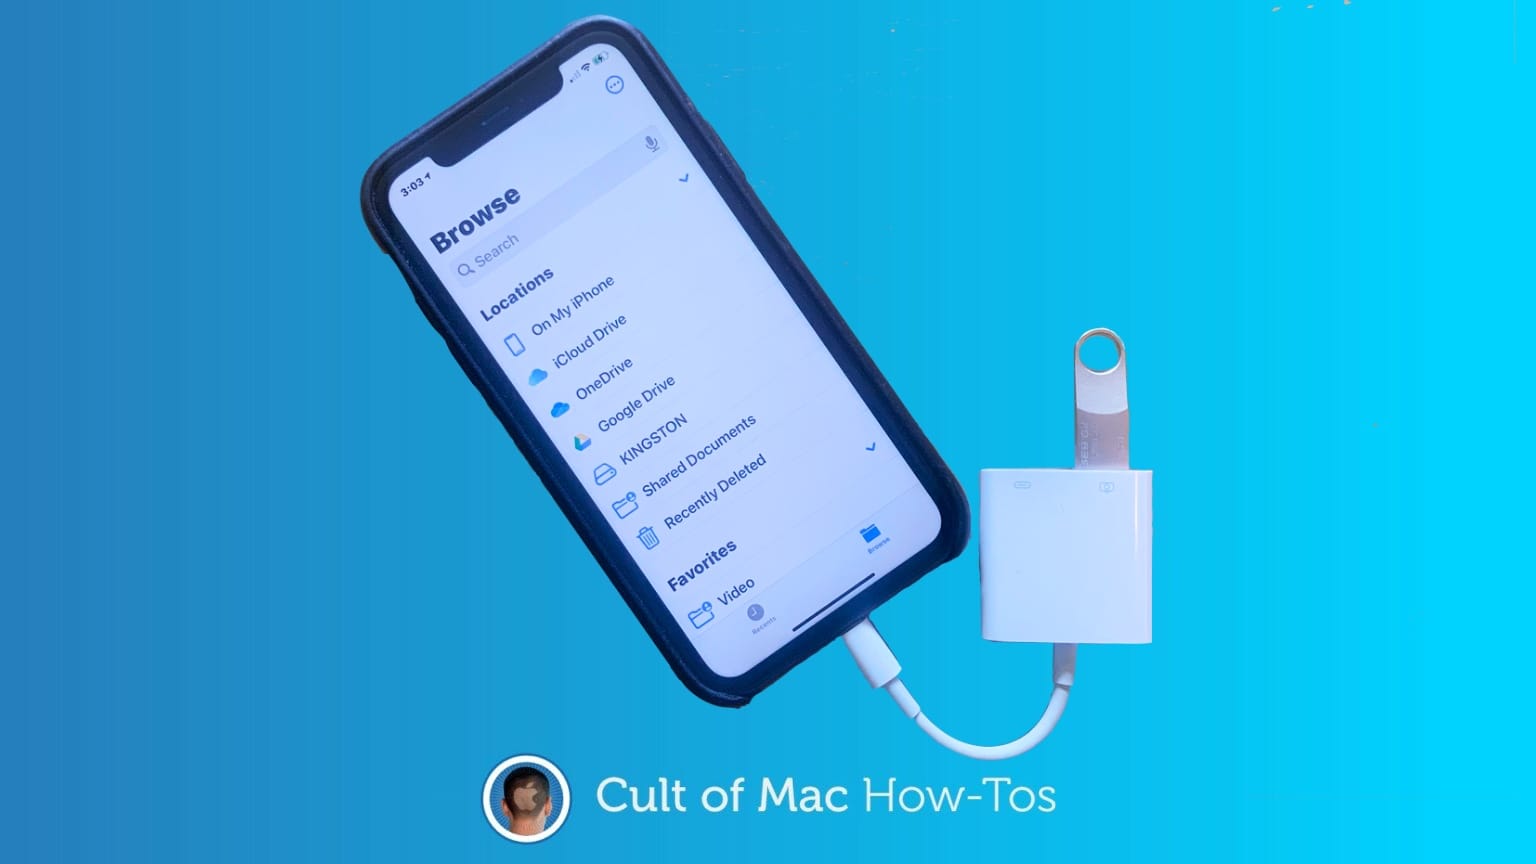 Connecting a USB drive to an iPhone is a snap.